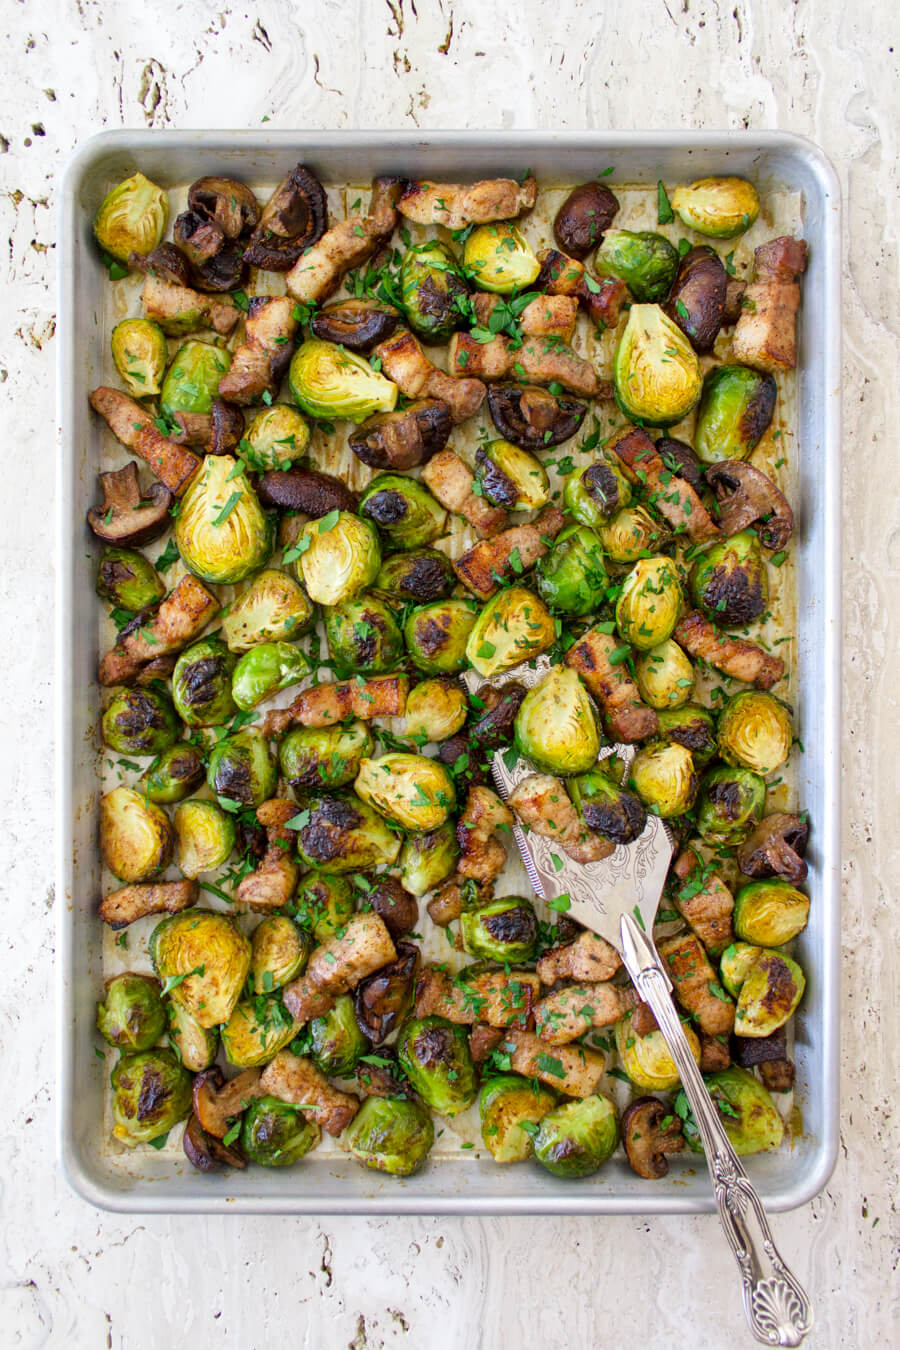 These Roasted Brussel Sprouts with Pork Belly & Mushrooms are super easy to make and roast in one pan for a very delicious side dish! Recipe at www.designsofanykind.com